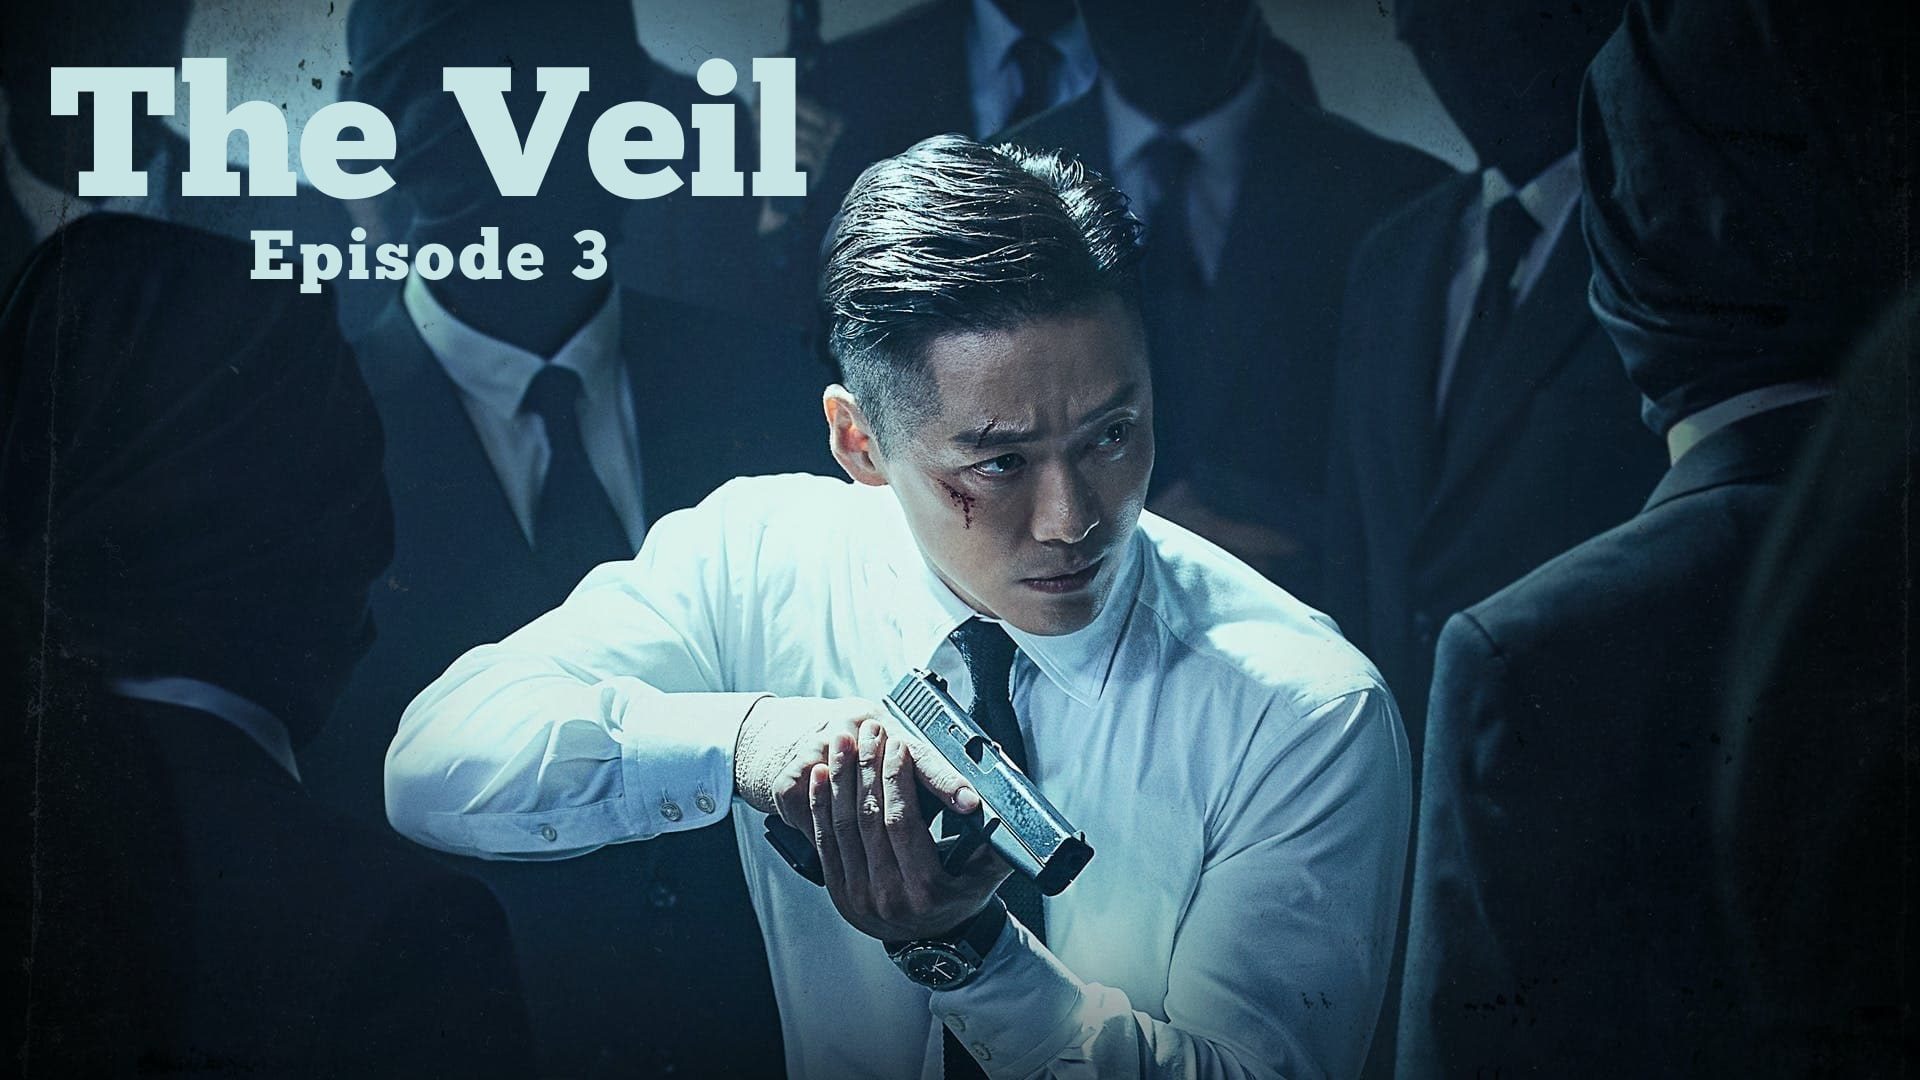 The Veil Episode 3: Release Date & Spoilers